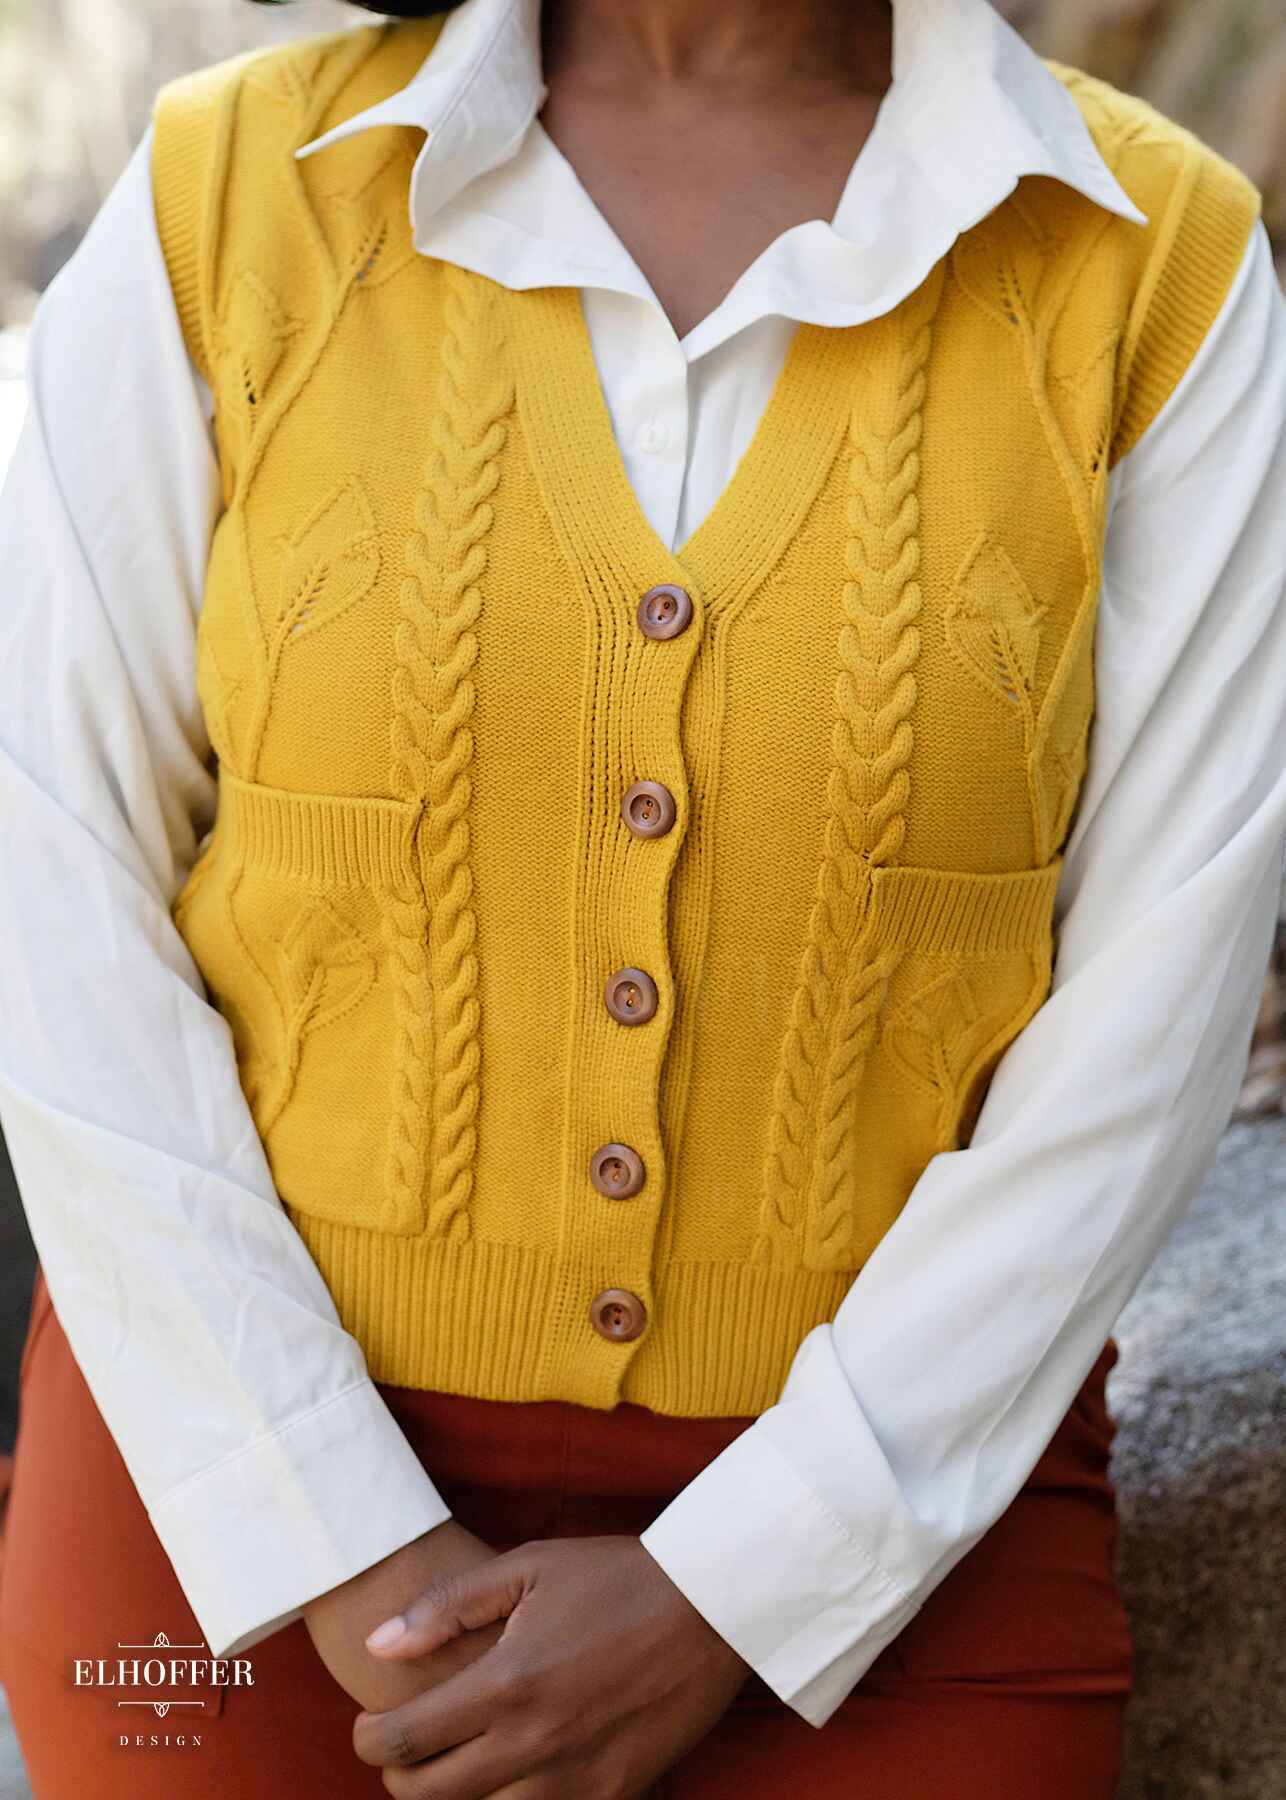 A close up of a golden yellow button up knit vest with a leafy vine and cable knit pattern, light brown buttons, and front pockets.